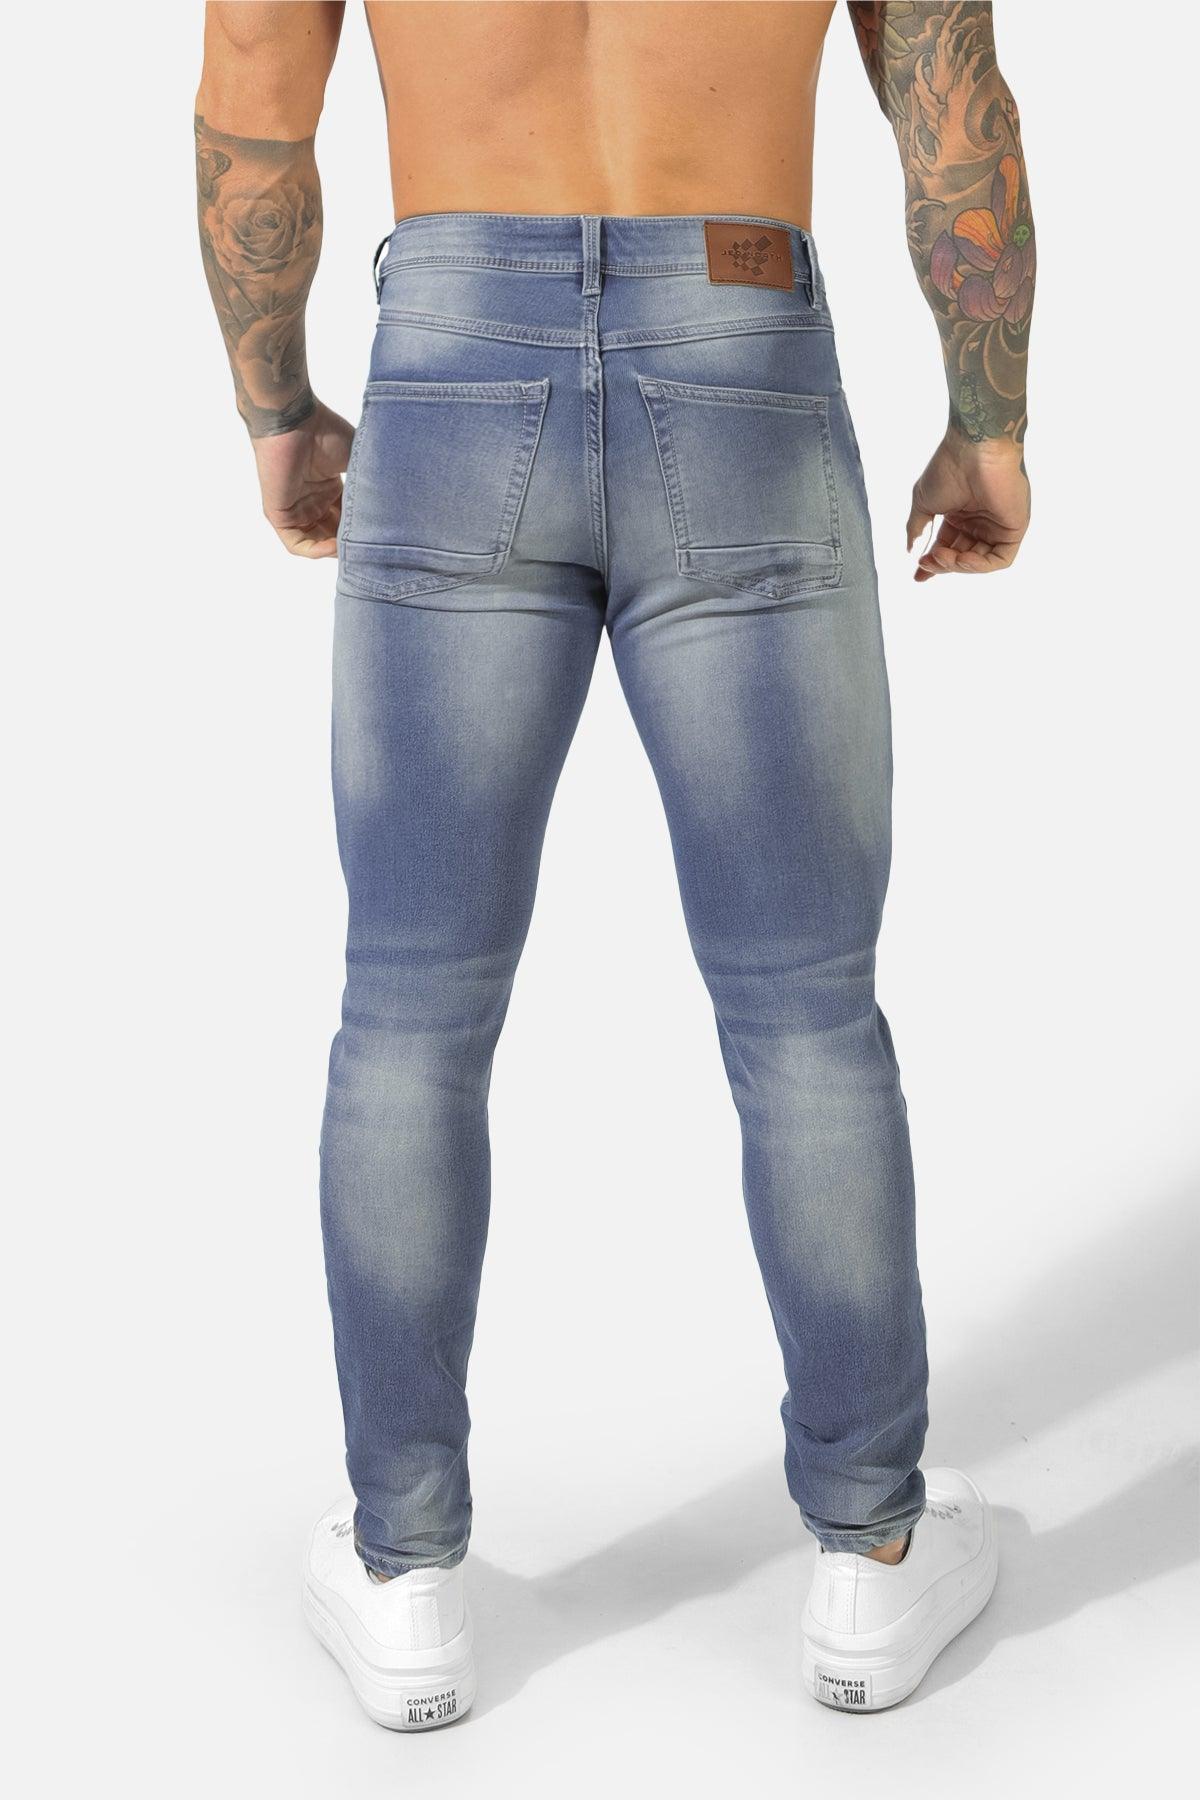 Men's Premium Fitted Stretchy Jeans - Faded Blue - Jed North Canada